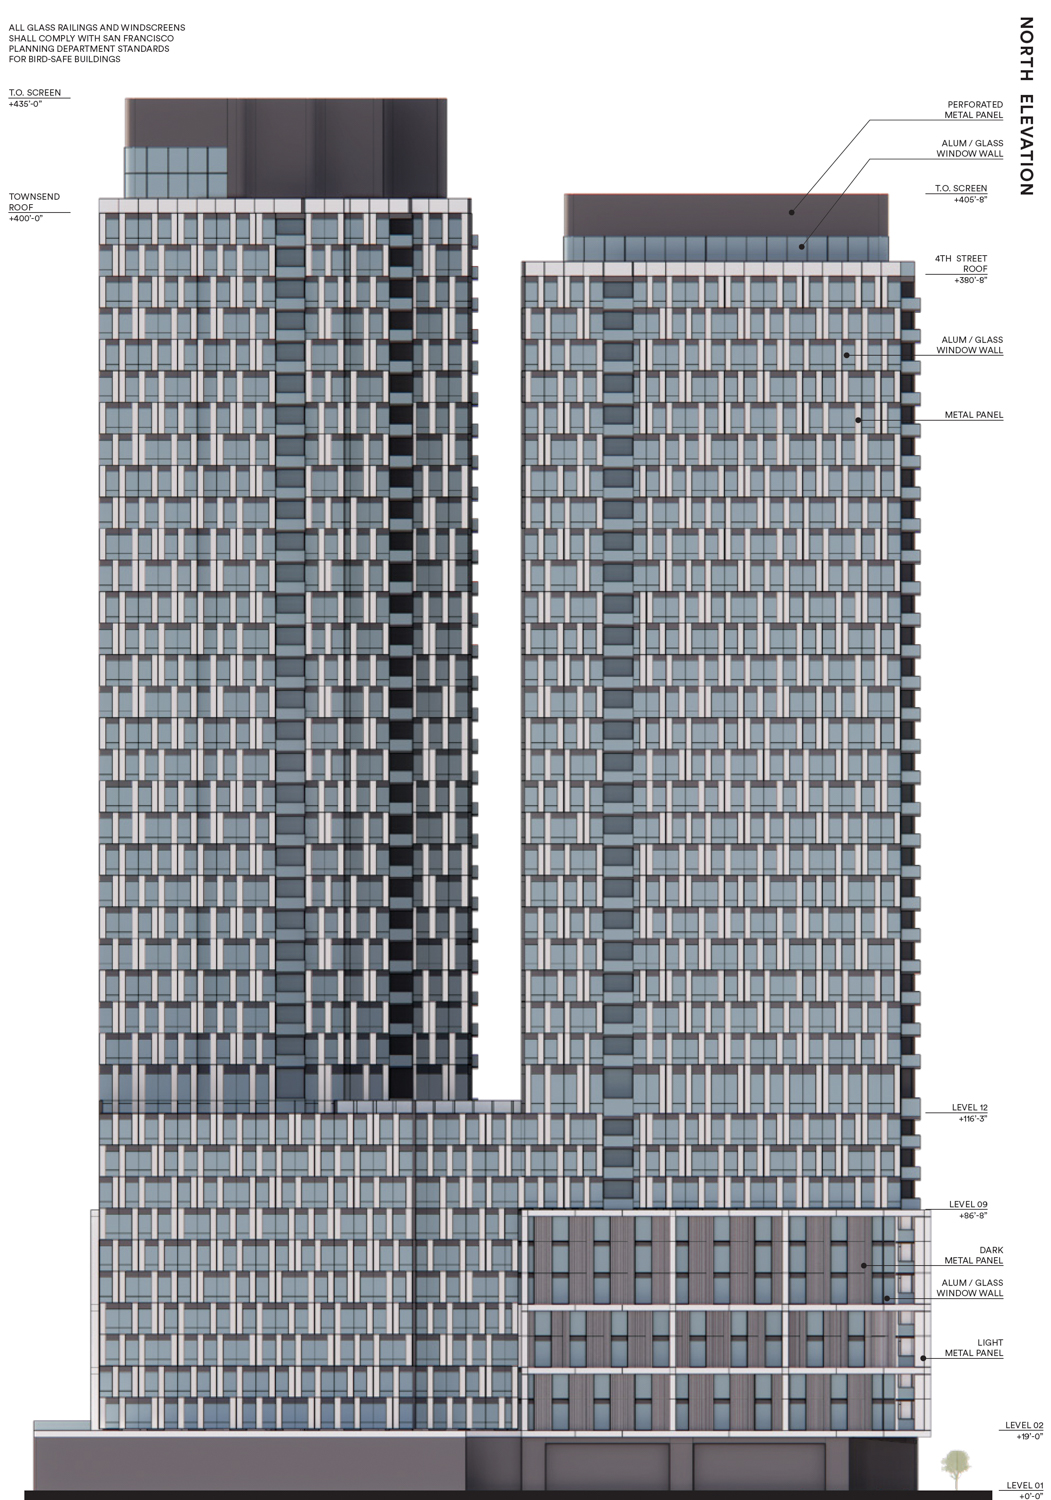 655 4th Street vertical facade elevation, illustration by SCB and Iwamotoscott Architecture